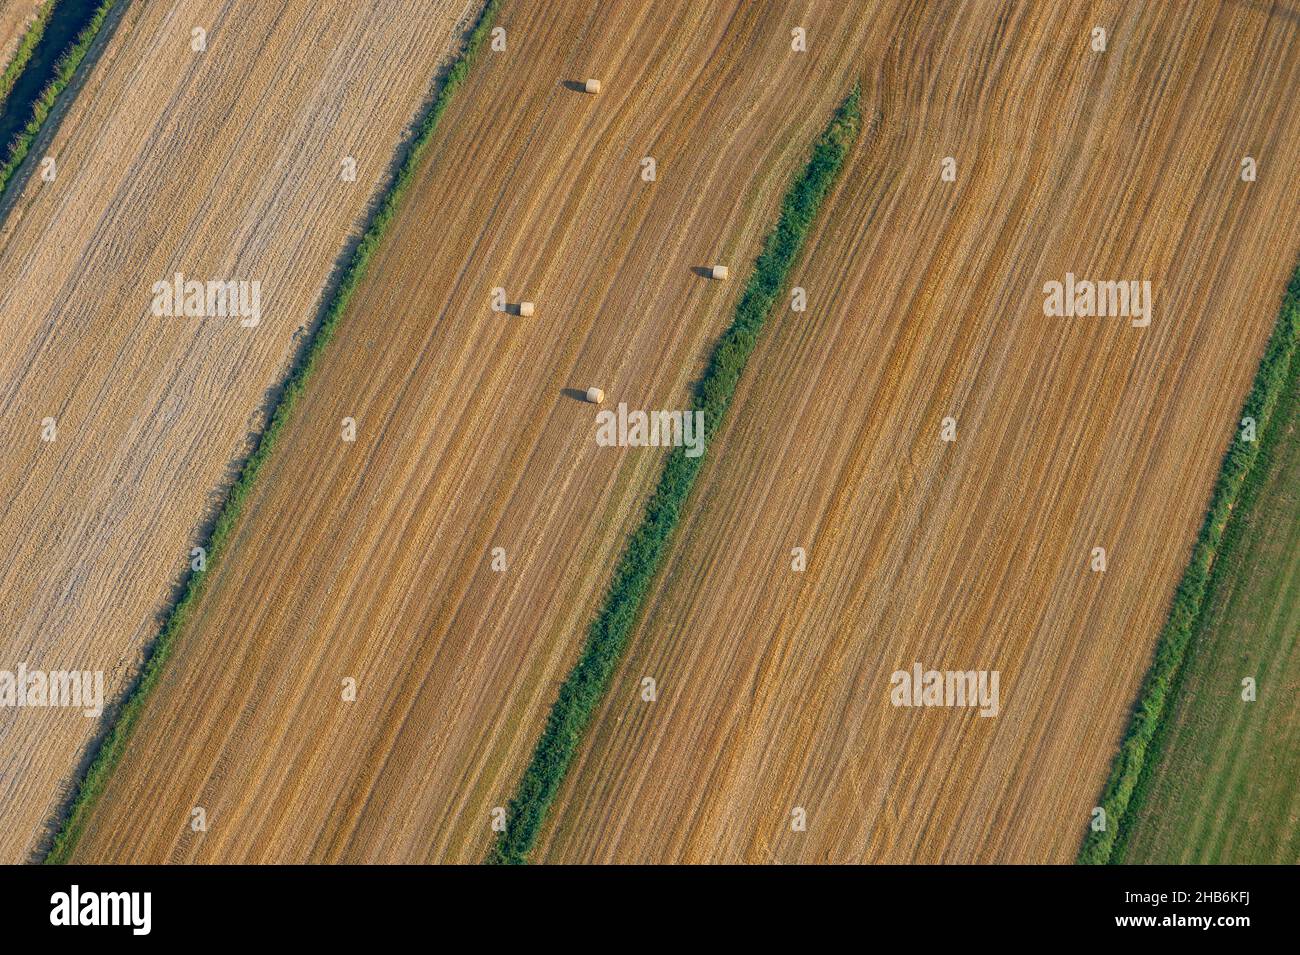 grain field with round straw bales, aerial view, Germany, Schleswig-Holstein Stock Photo